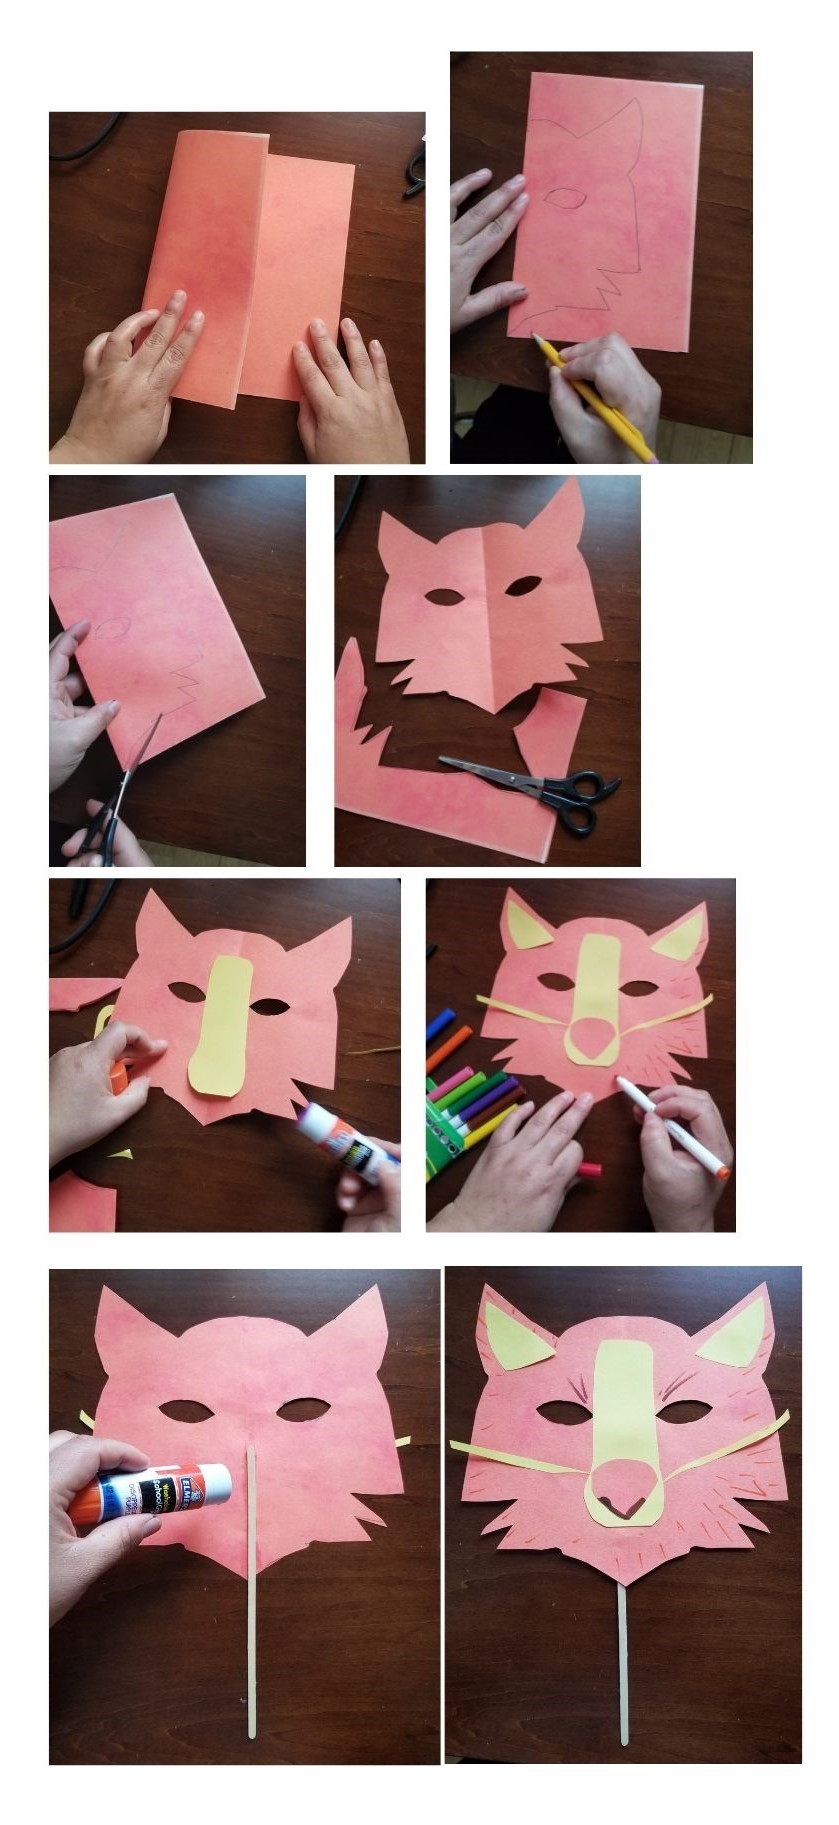 A grouping of images that showing the steps of how to make an animal mask using two sheets of construction paper and a popsicle stick. 